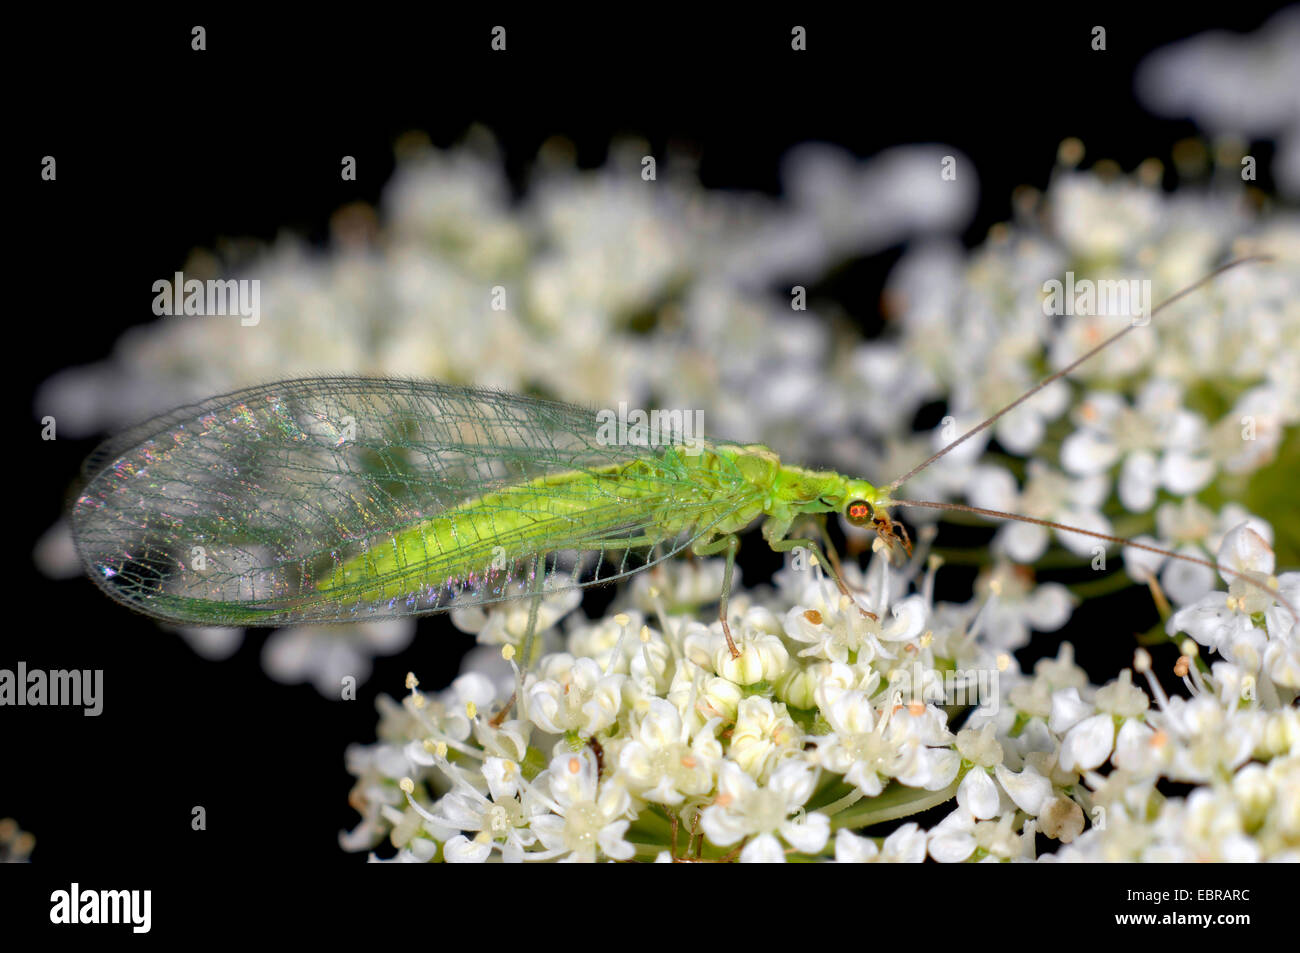 common green lacewing (Chrysoperla carnea, Chrysopa carnea, Anisochrysa carnea), Chrysopid fly sitting on a white flower of an umbellifer, Germany Stock Photo